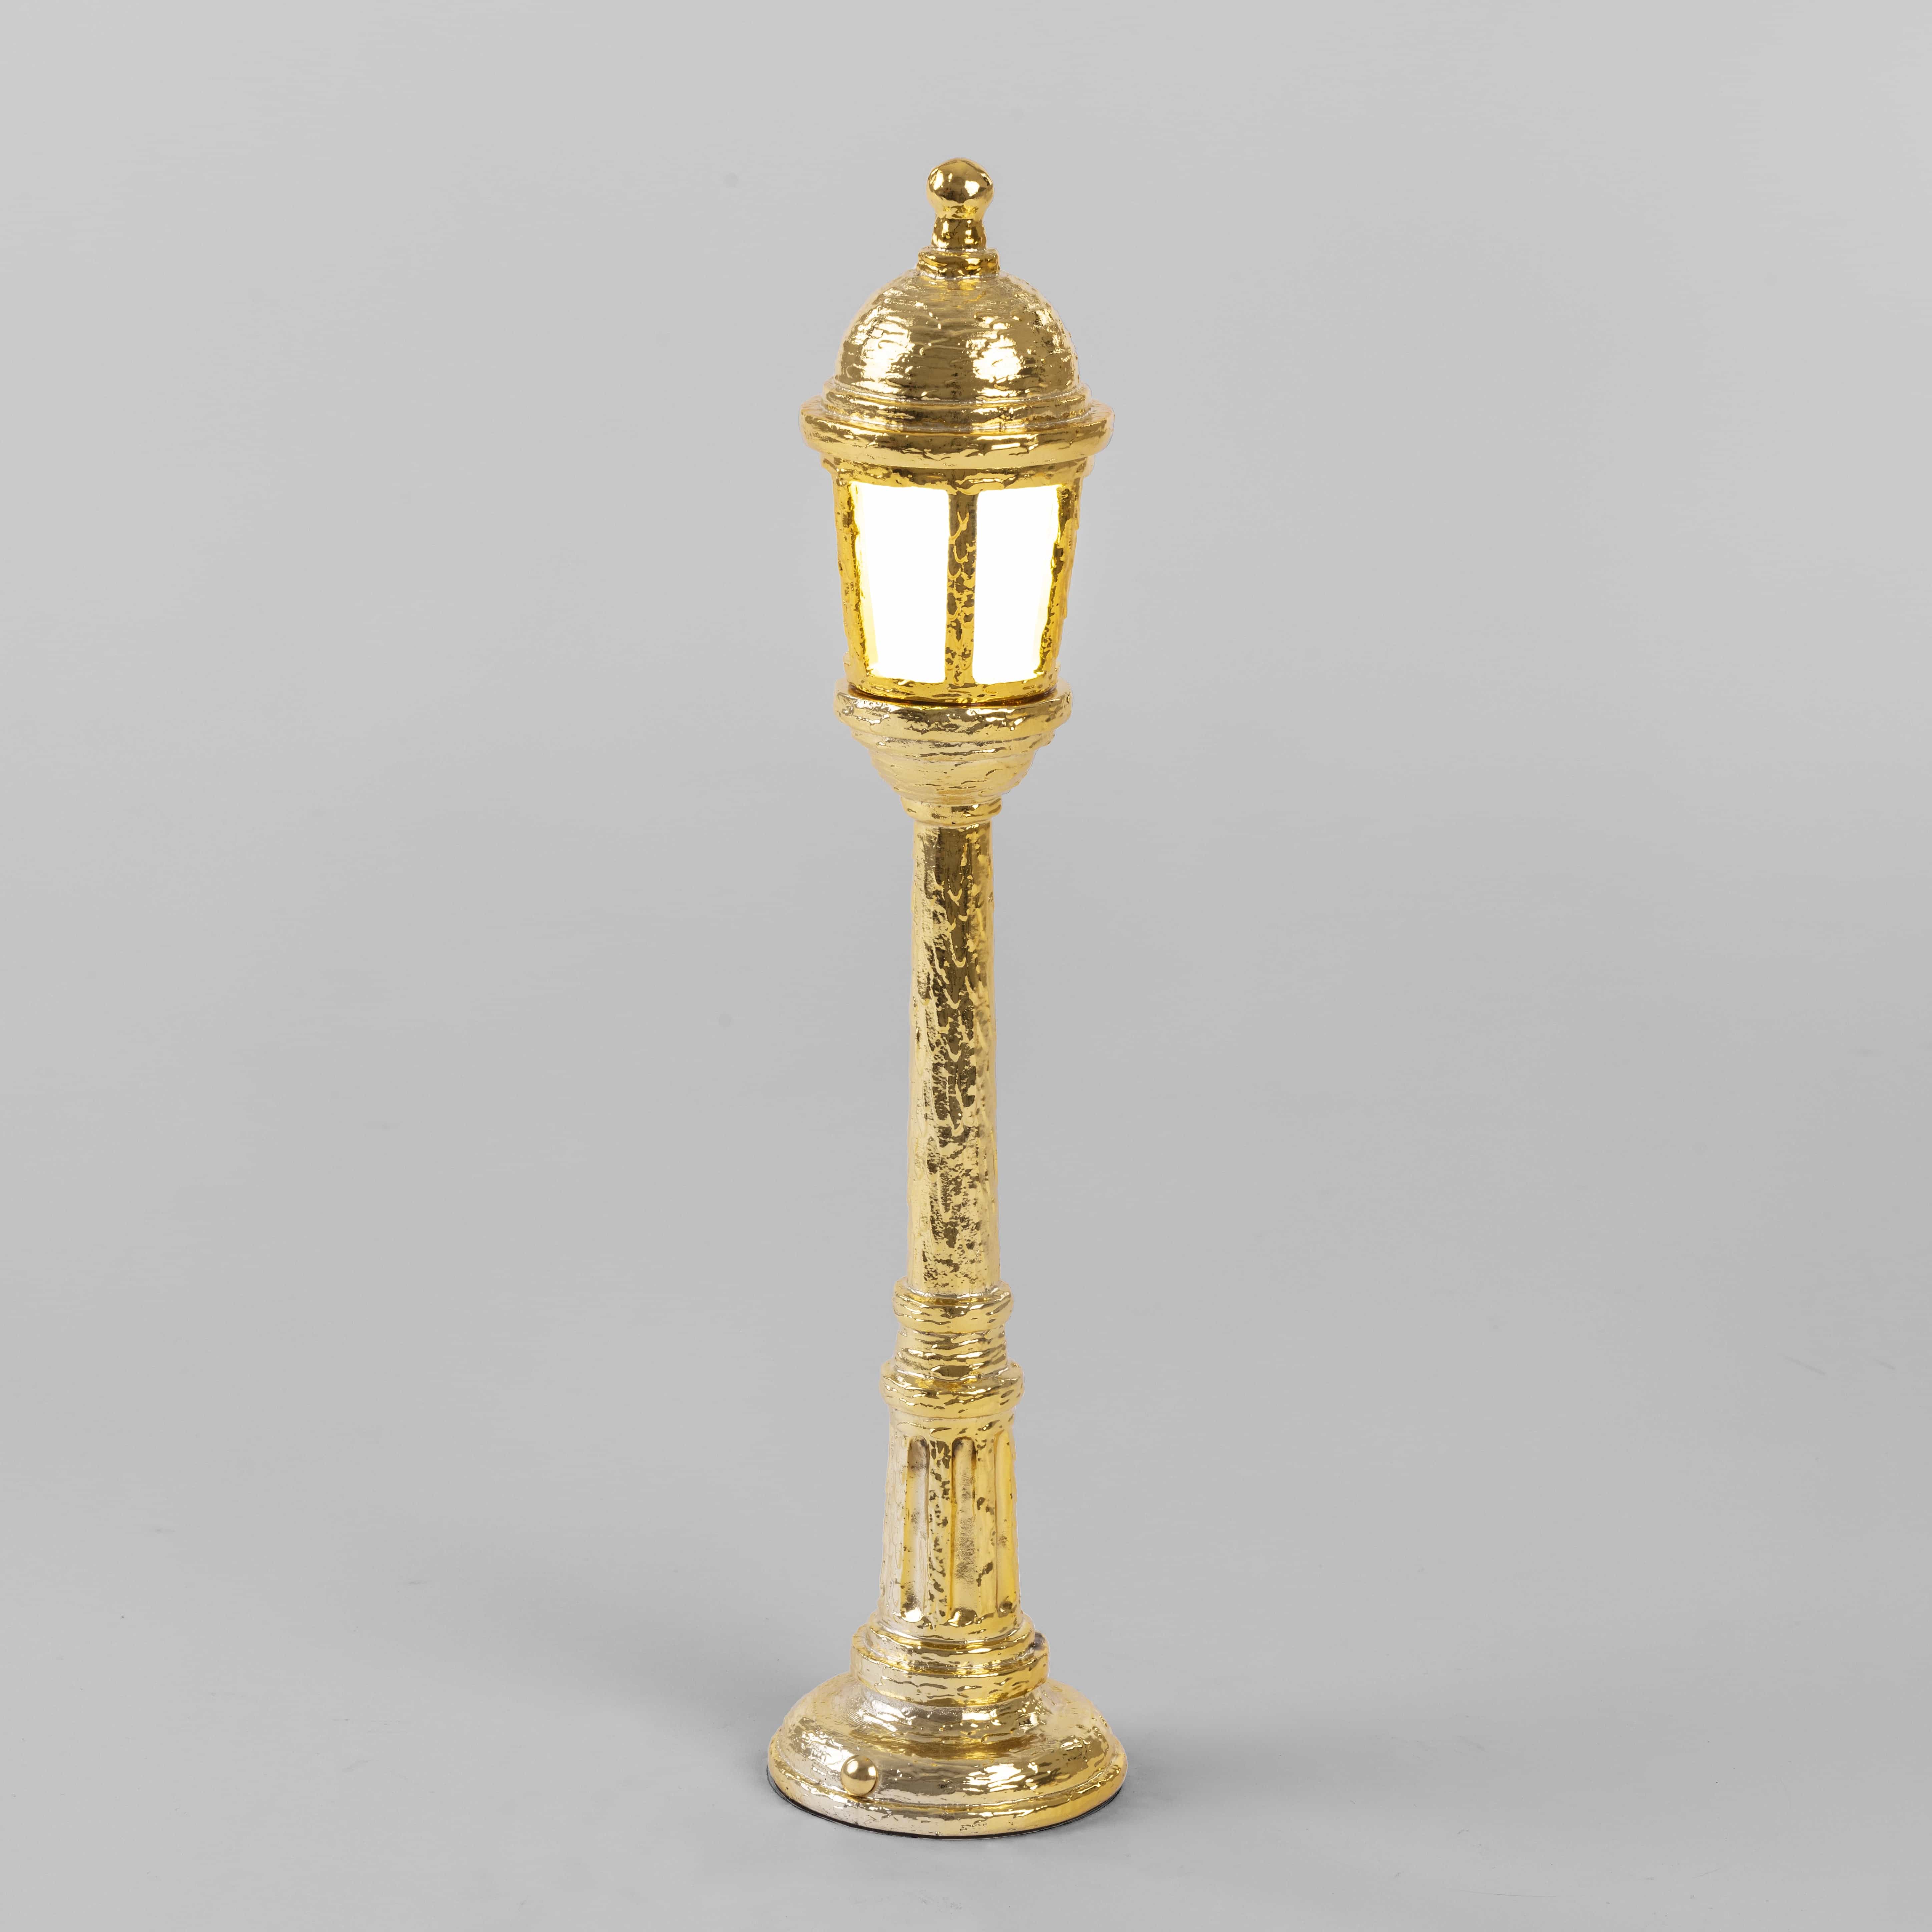 Street lamp (dining) resin table lamp - Gold